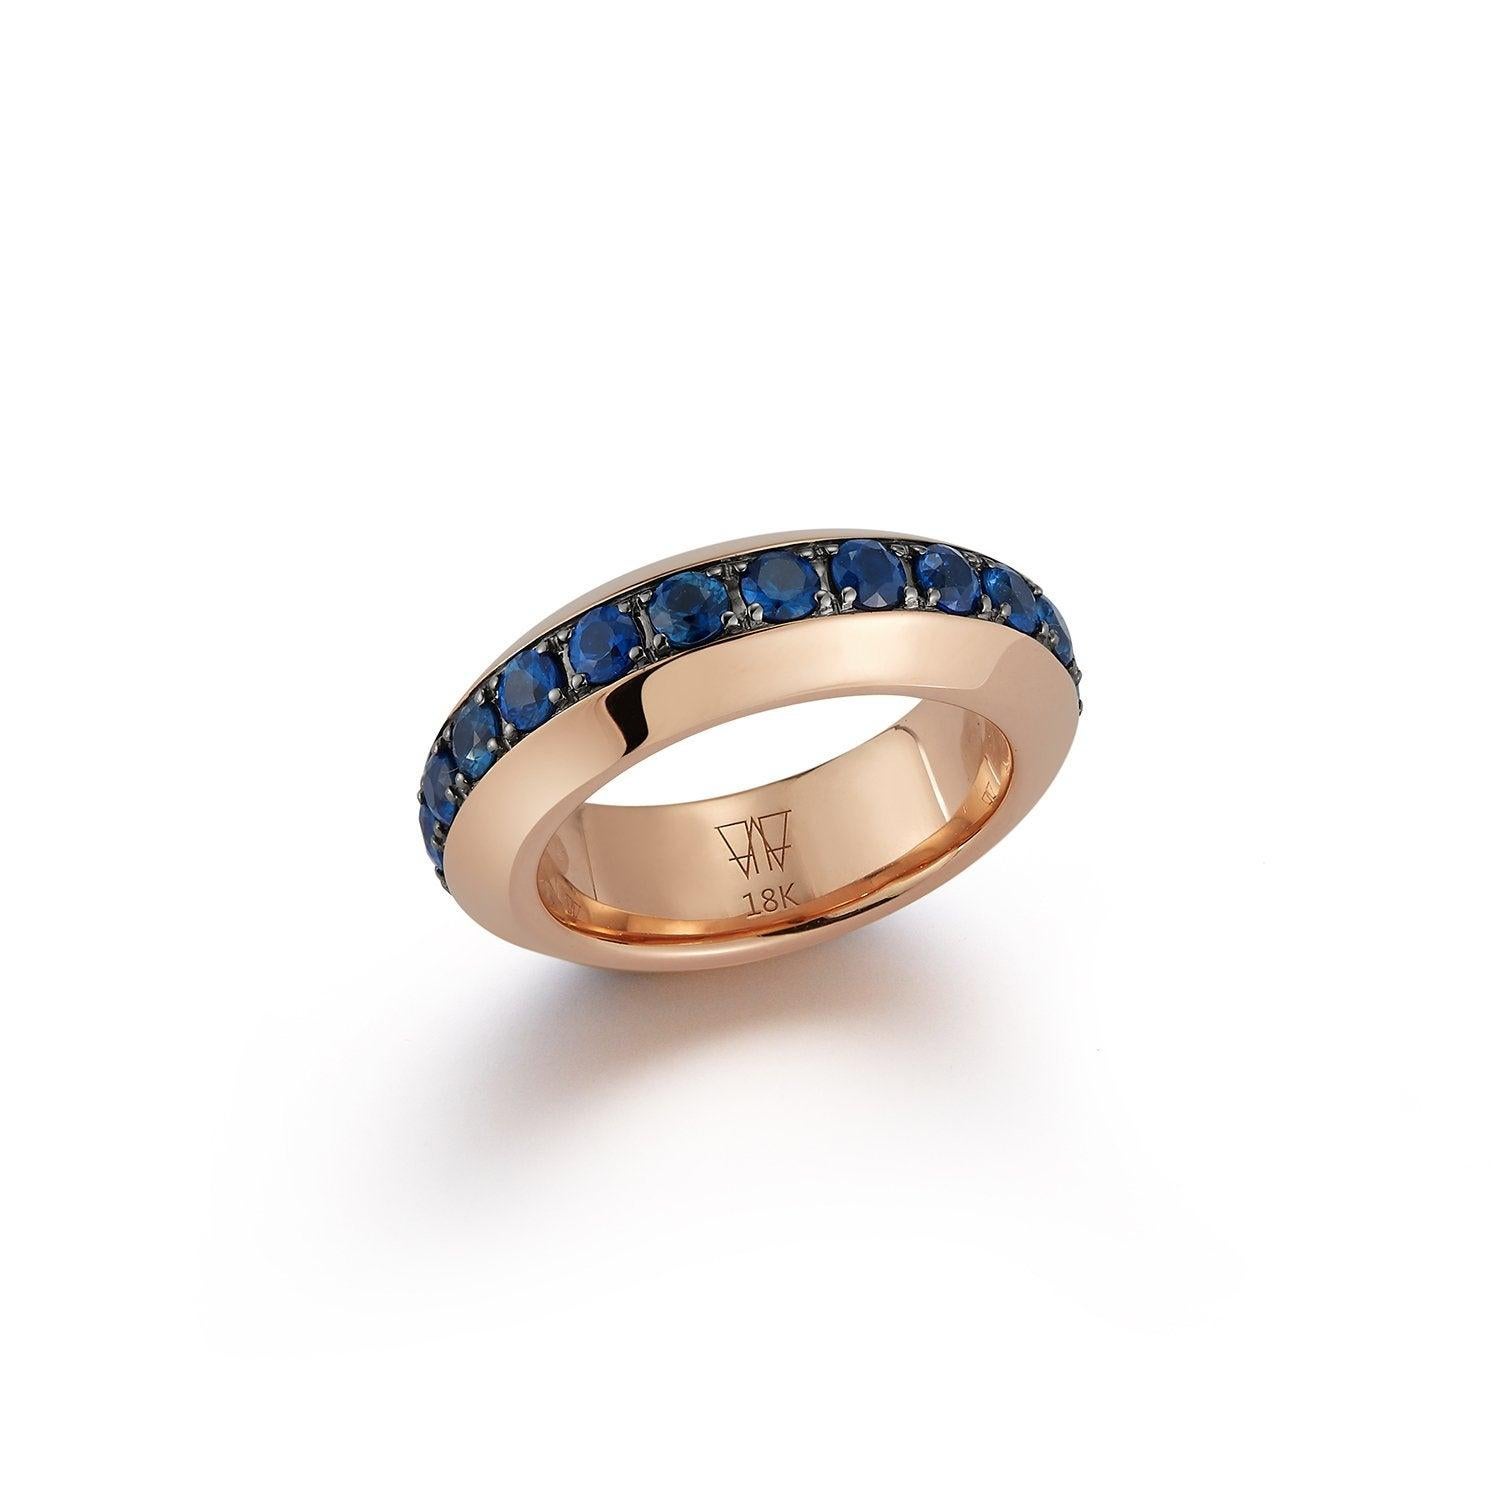 For Sale:  Walters Faith 18K Rose Gold and Blue Sapphire Angled Band Ring 3